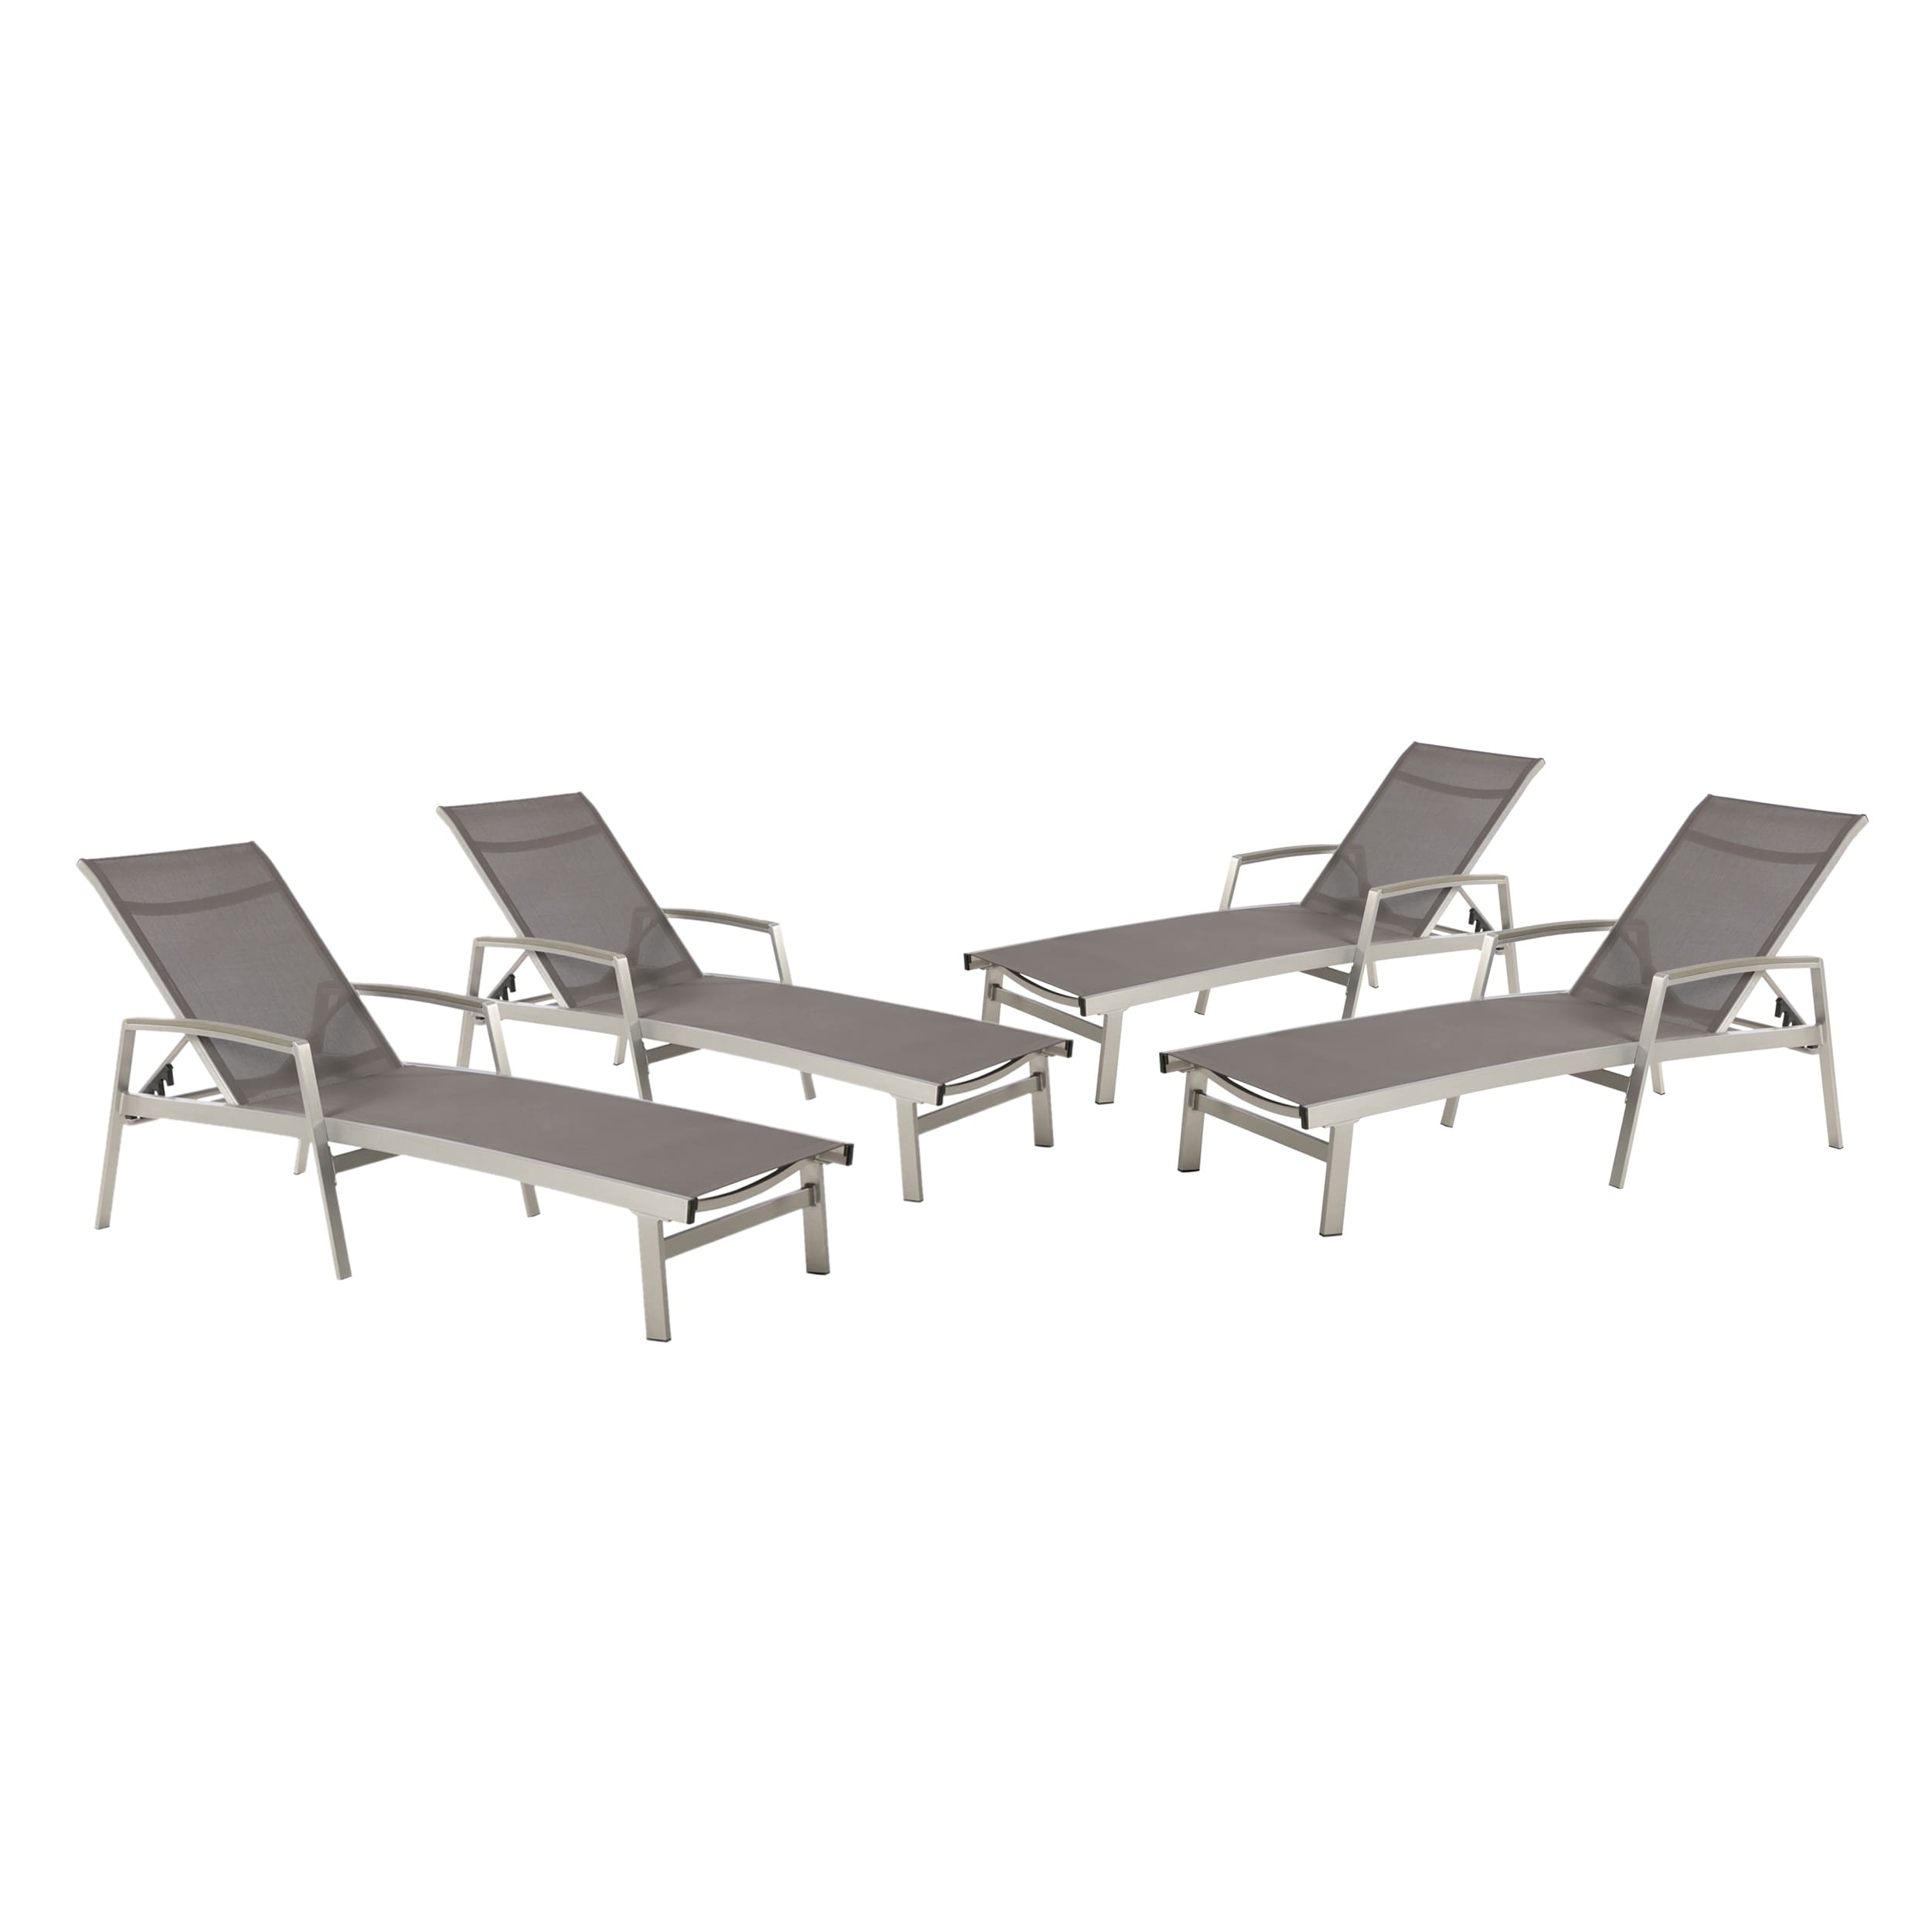 Oxton Outdoor Aluminum Chaise Lounge (set Of 4) By Christopher Knight Home